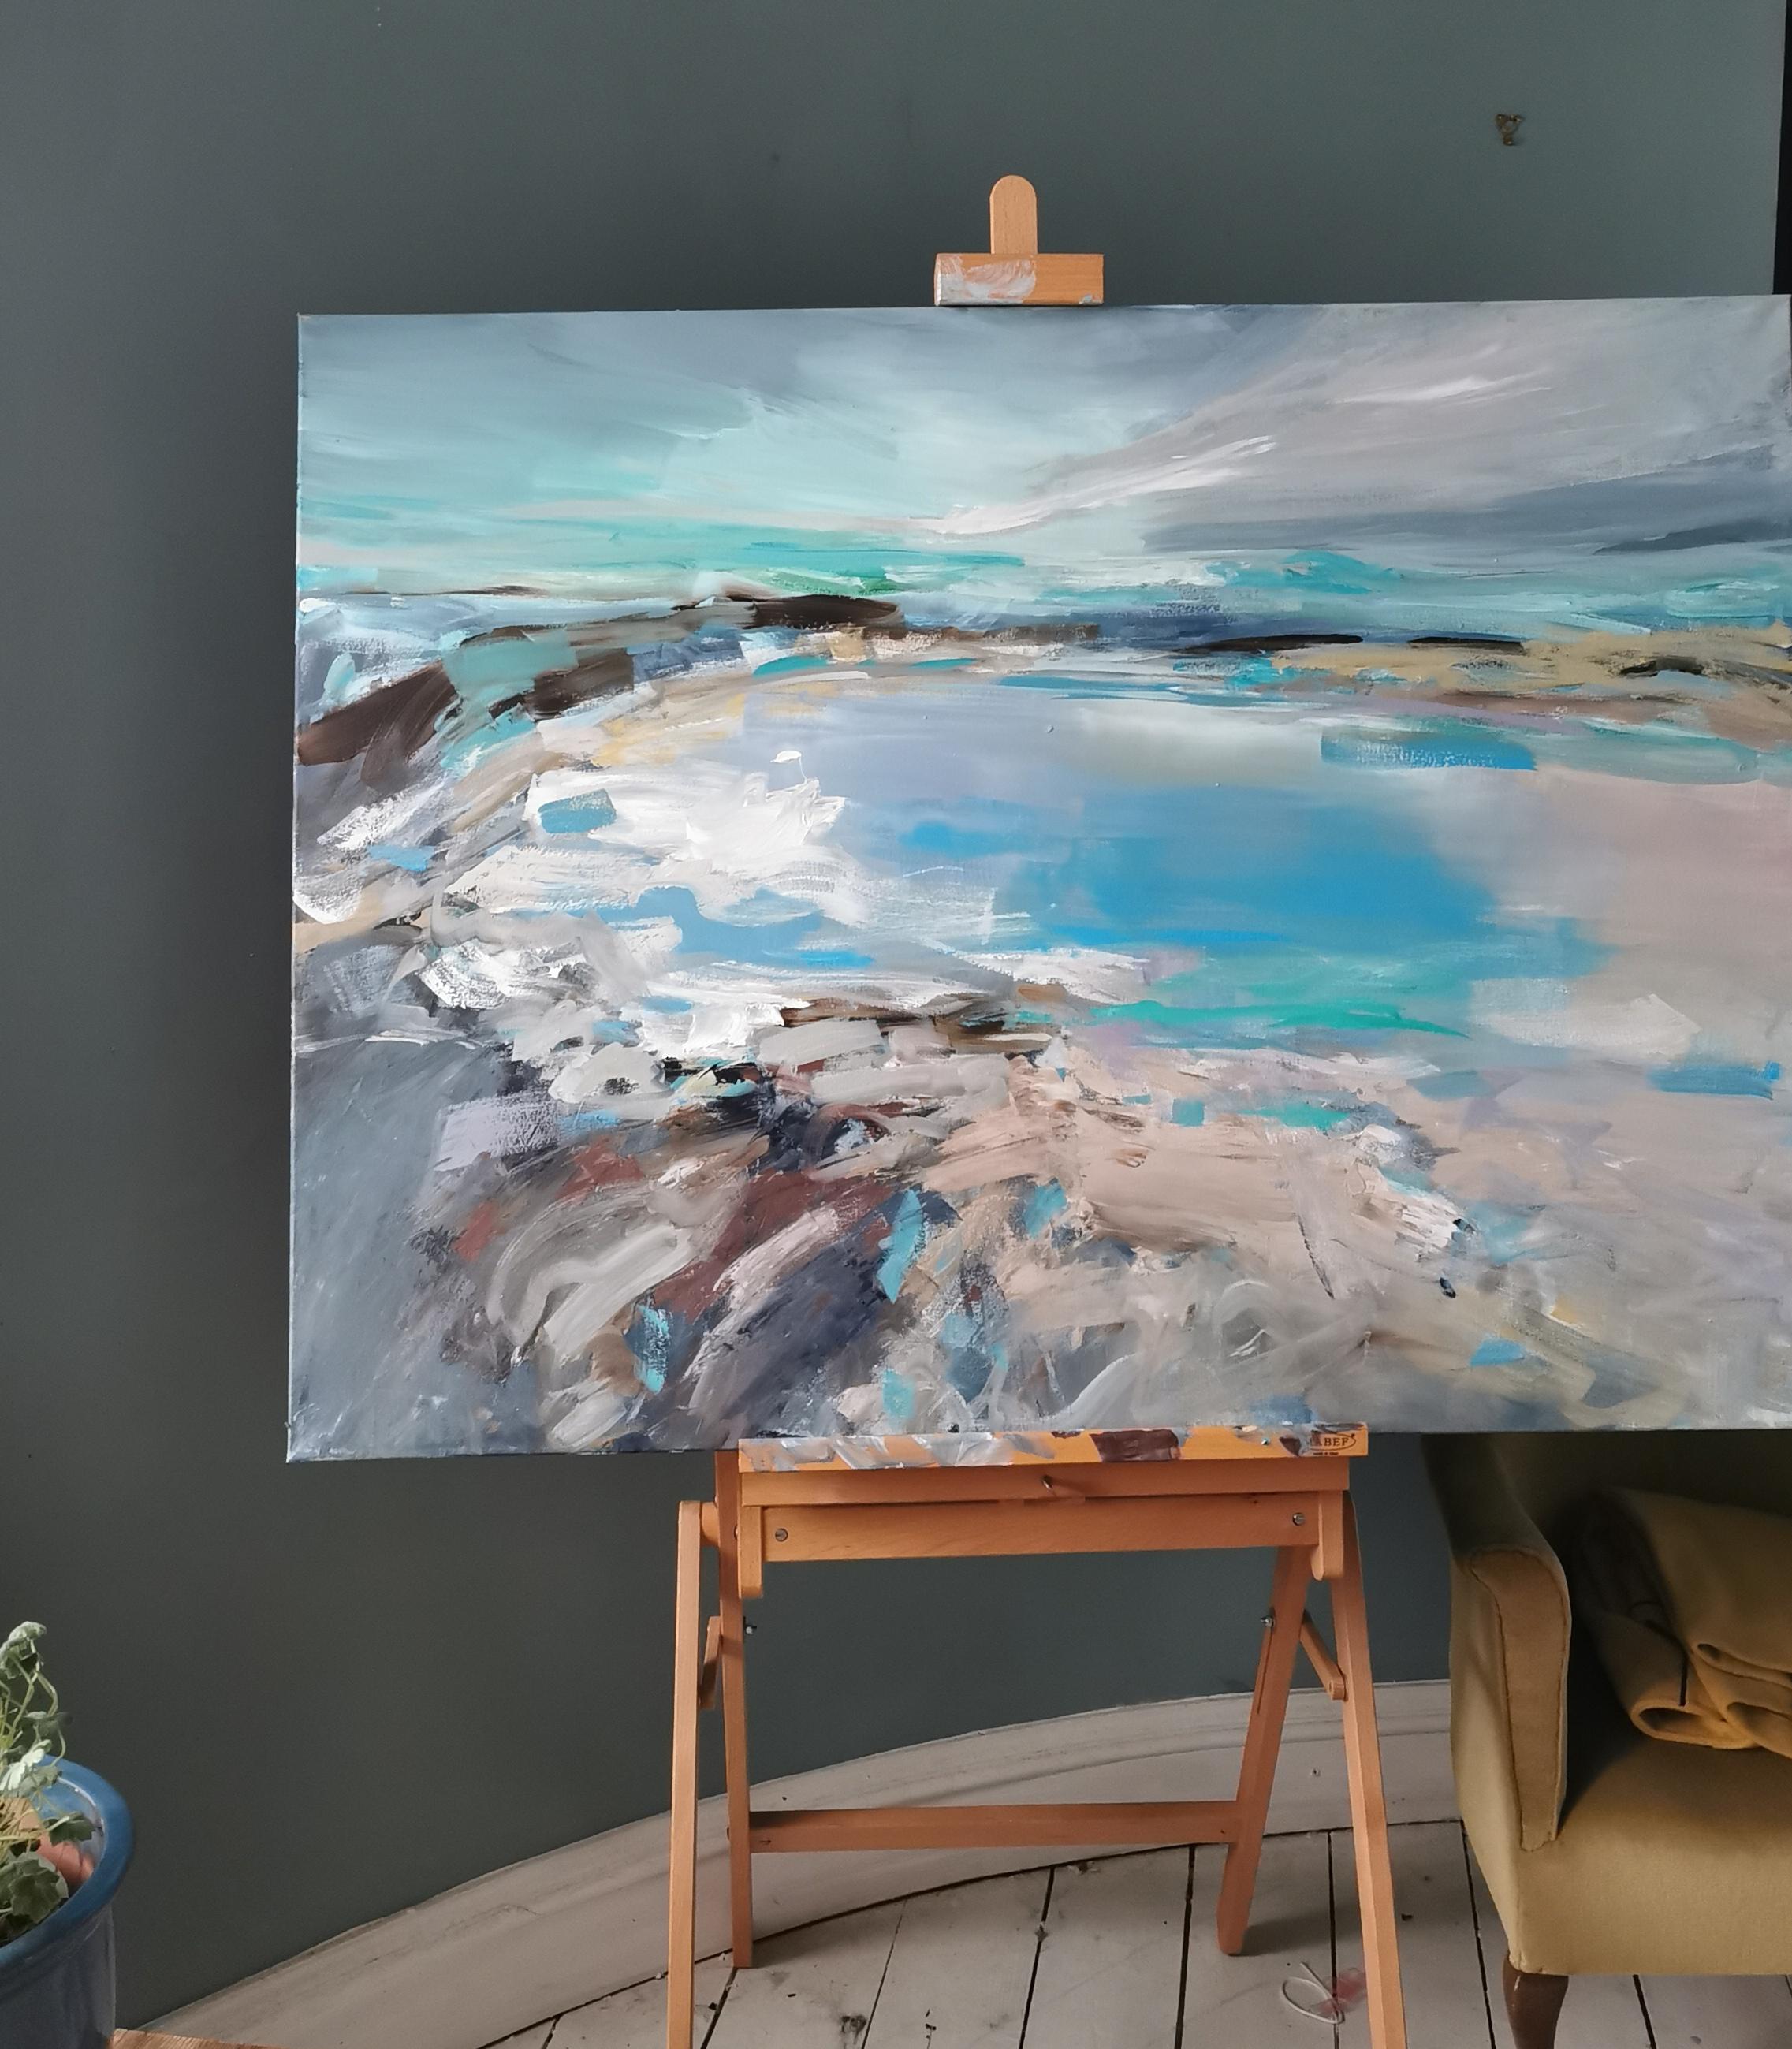 The artist said of the work: Painted initially based on the rocks looking over Loch Lomond, I then returned to my studio to complete this painting. It is atmospheric in its focus and I very much love its rich colour and capture of water and light